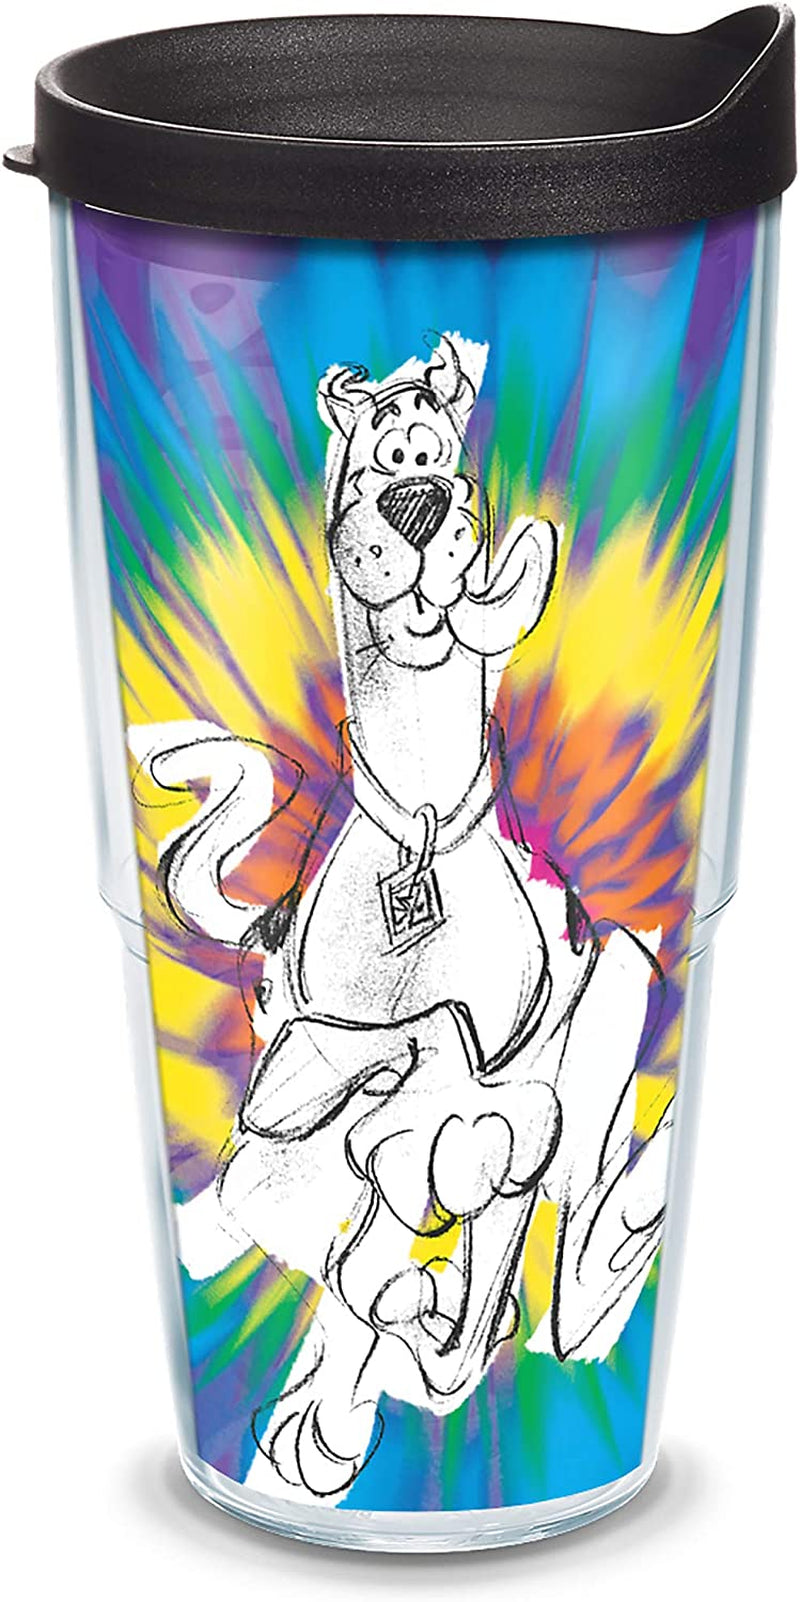 Tervis Warner Brothers - Scooby-Doo Made in USA Double Walled Insulated Tumbler Cup Keeps Drinks Cold & Hot, 10Oz Wavy, Tie-Dye